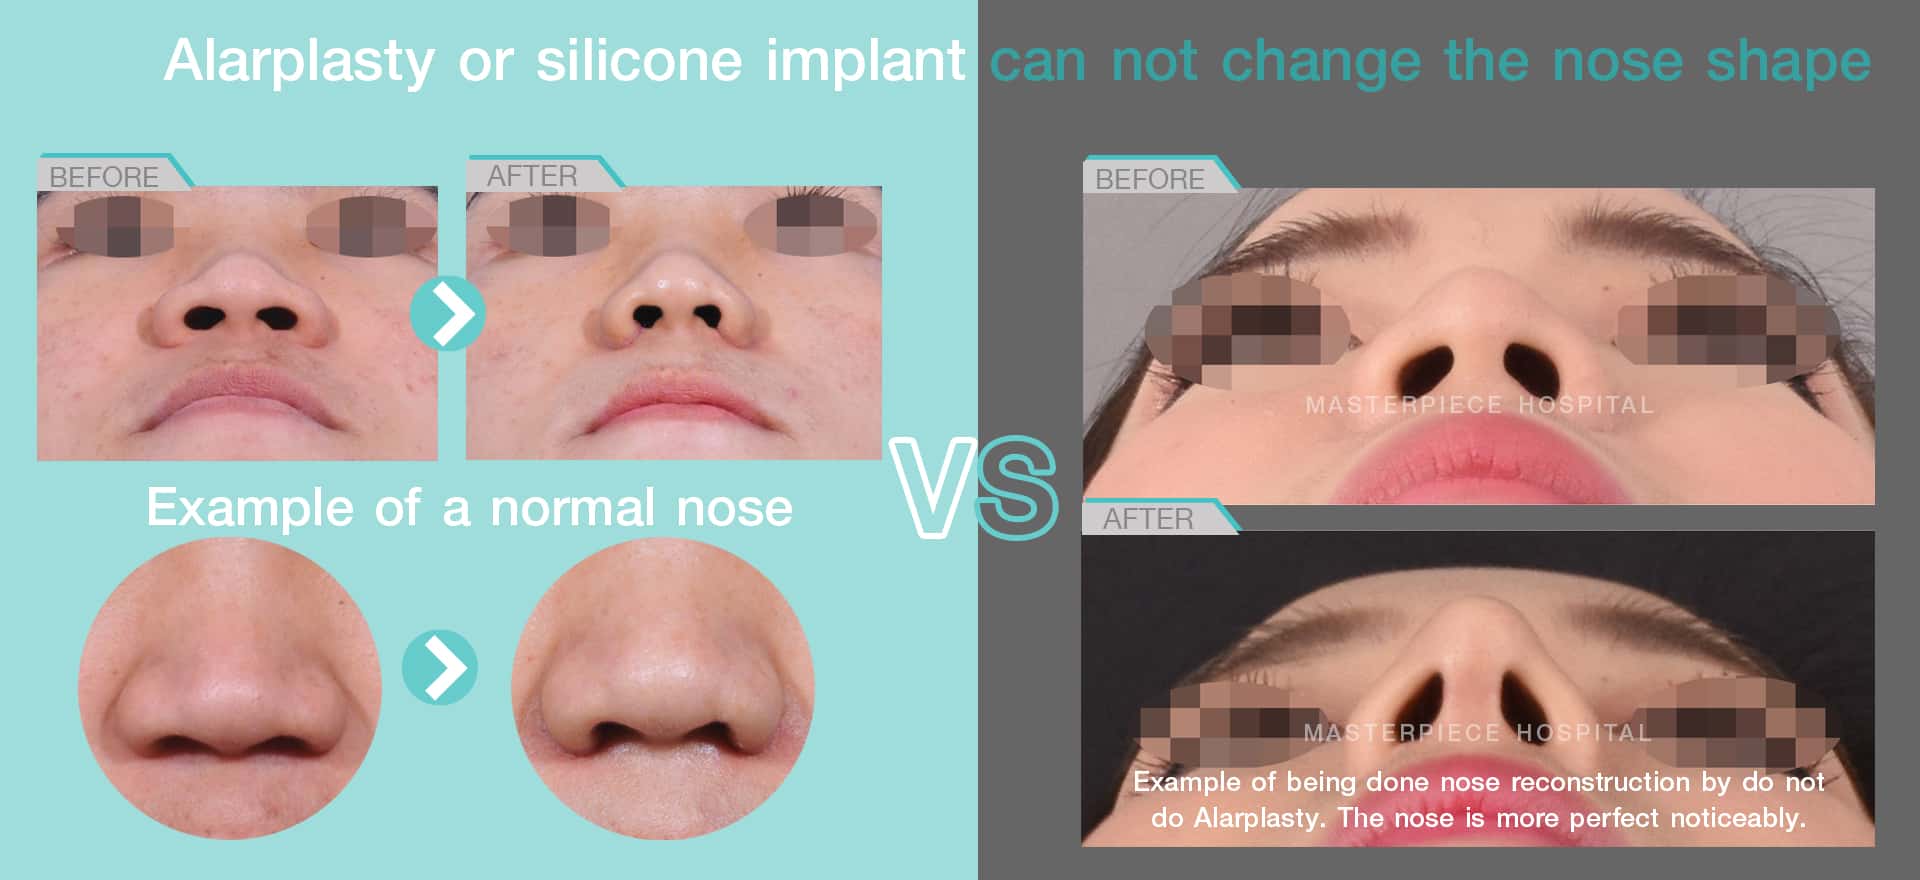 Alarplasty or silicone implant can not change the nose shape